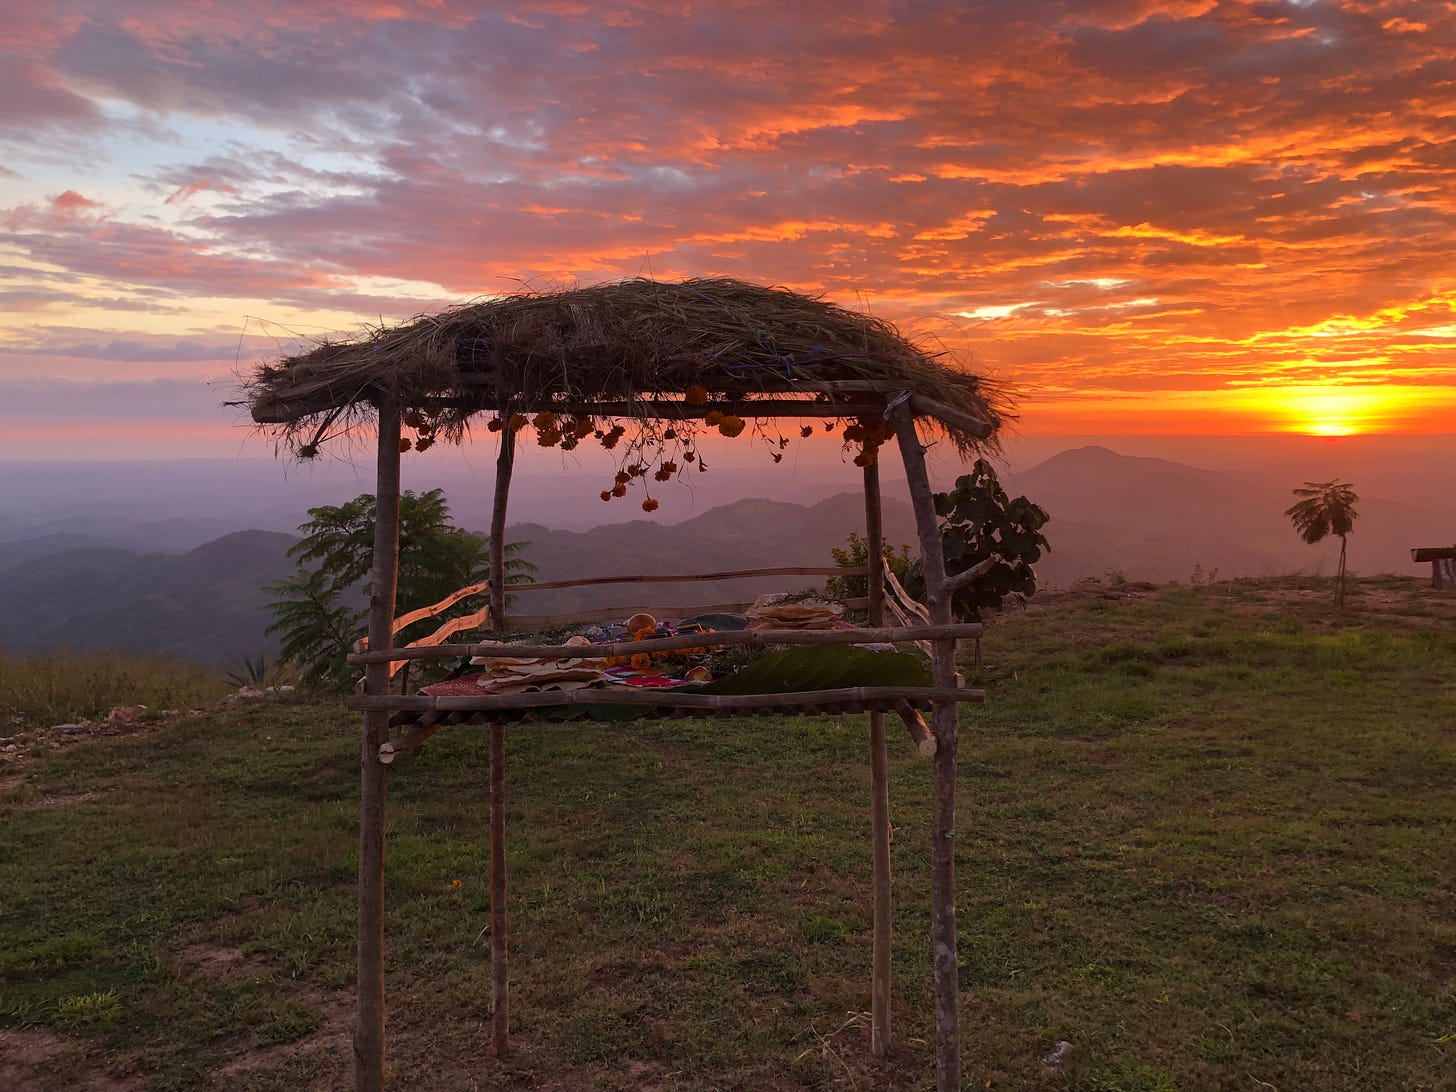 In the foreground is a small altar built with sticks and reeds and a grass-thatched roof. Various offerings and marigolds are on the table. The background is a sunset and the view of distant hills.